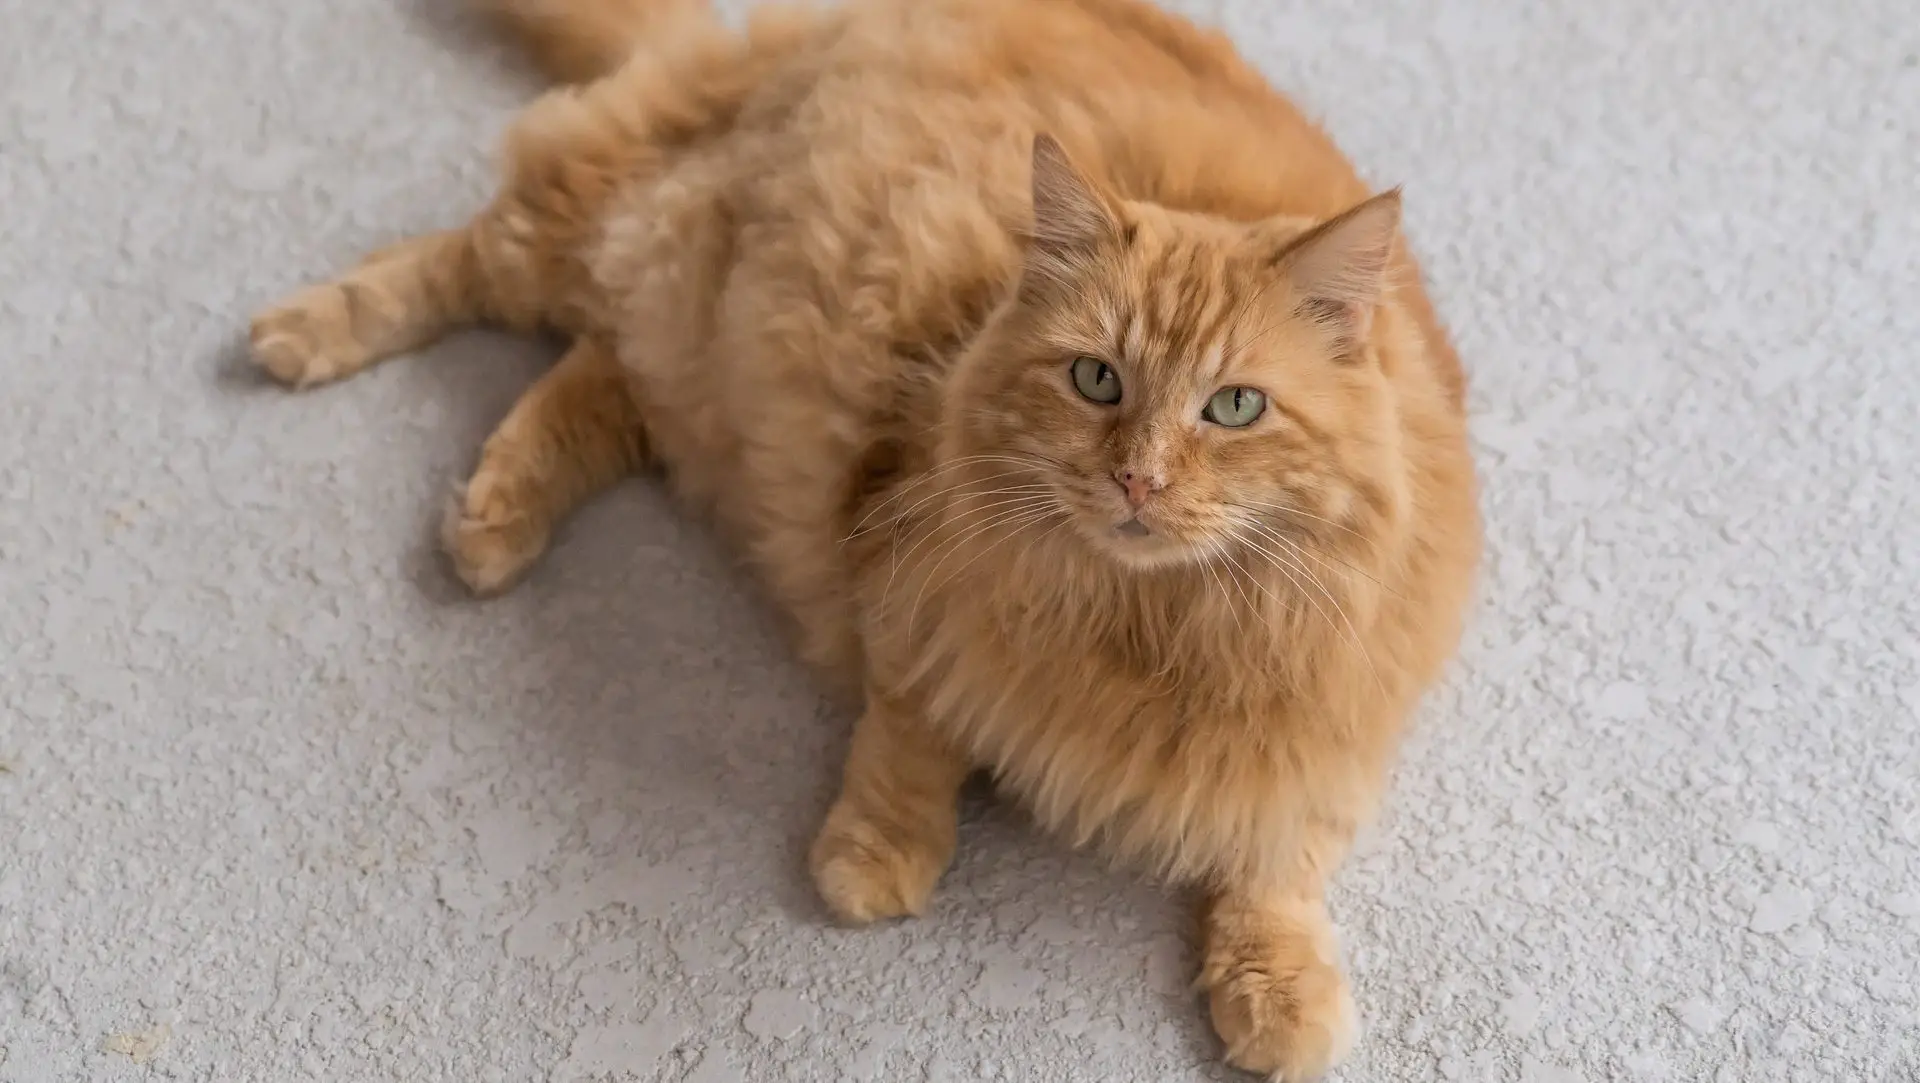 Fluffy, Stocky, or Short-Haired: Learn About the Most Popular Orange Cat Breeds |